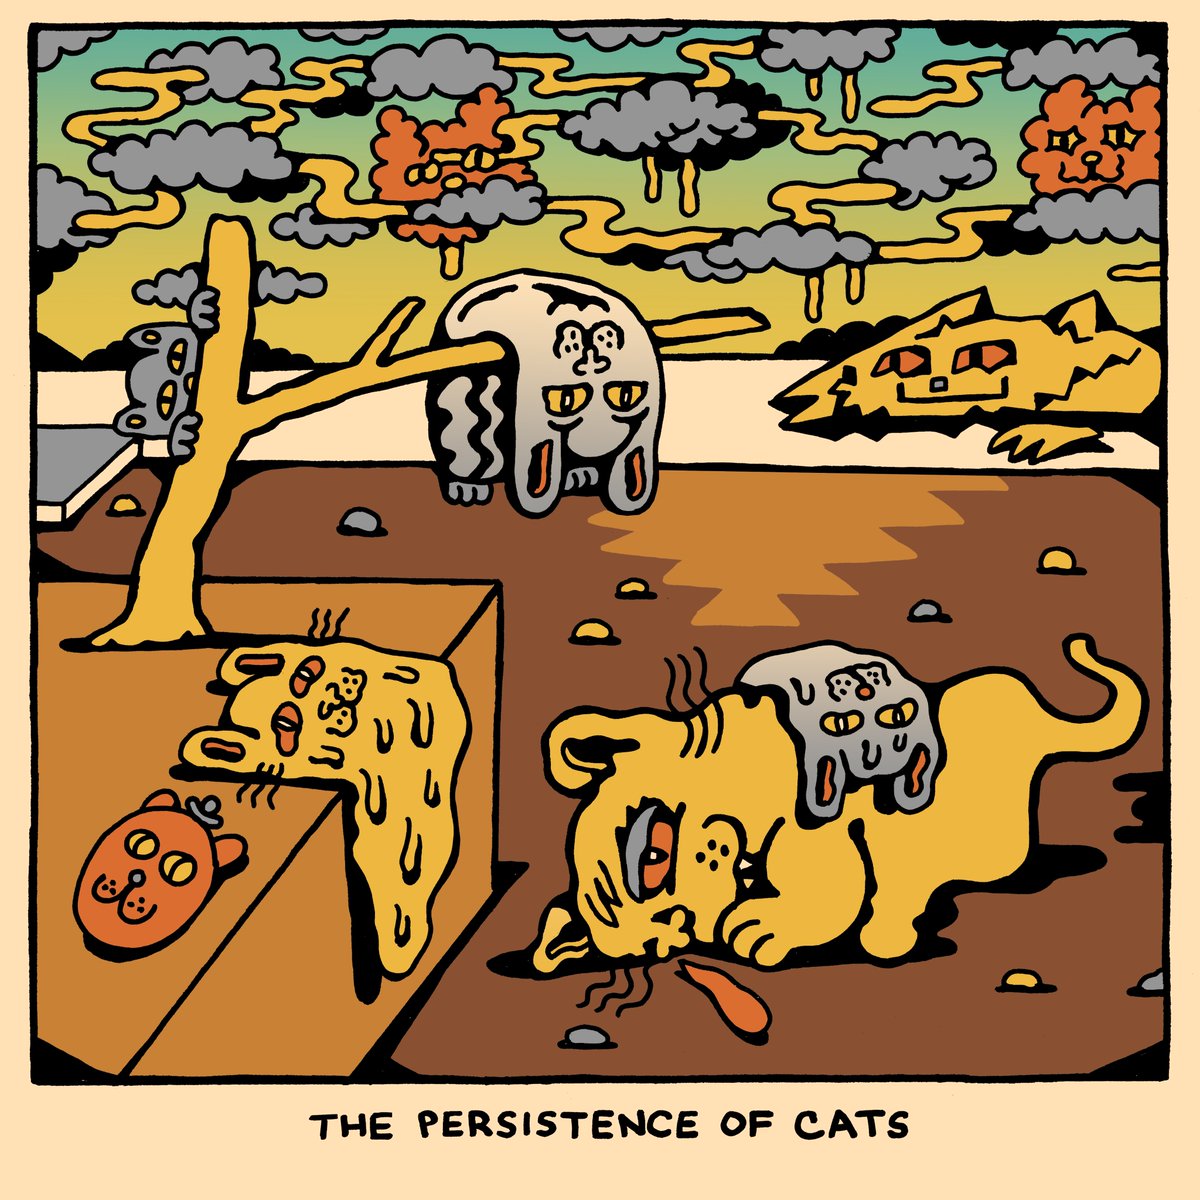 The Persistence of Cats by @killeracid